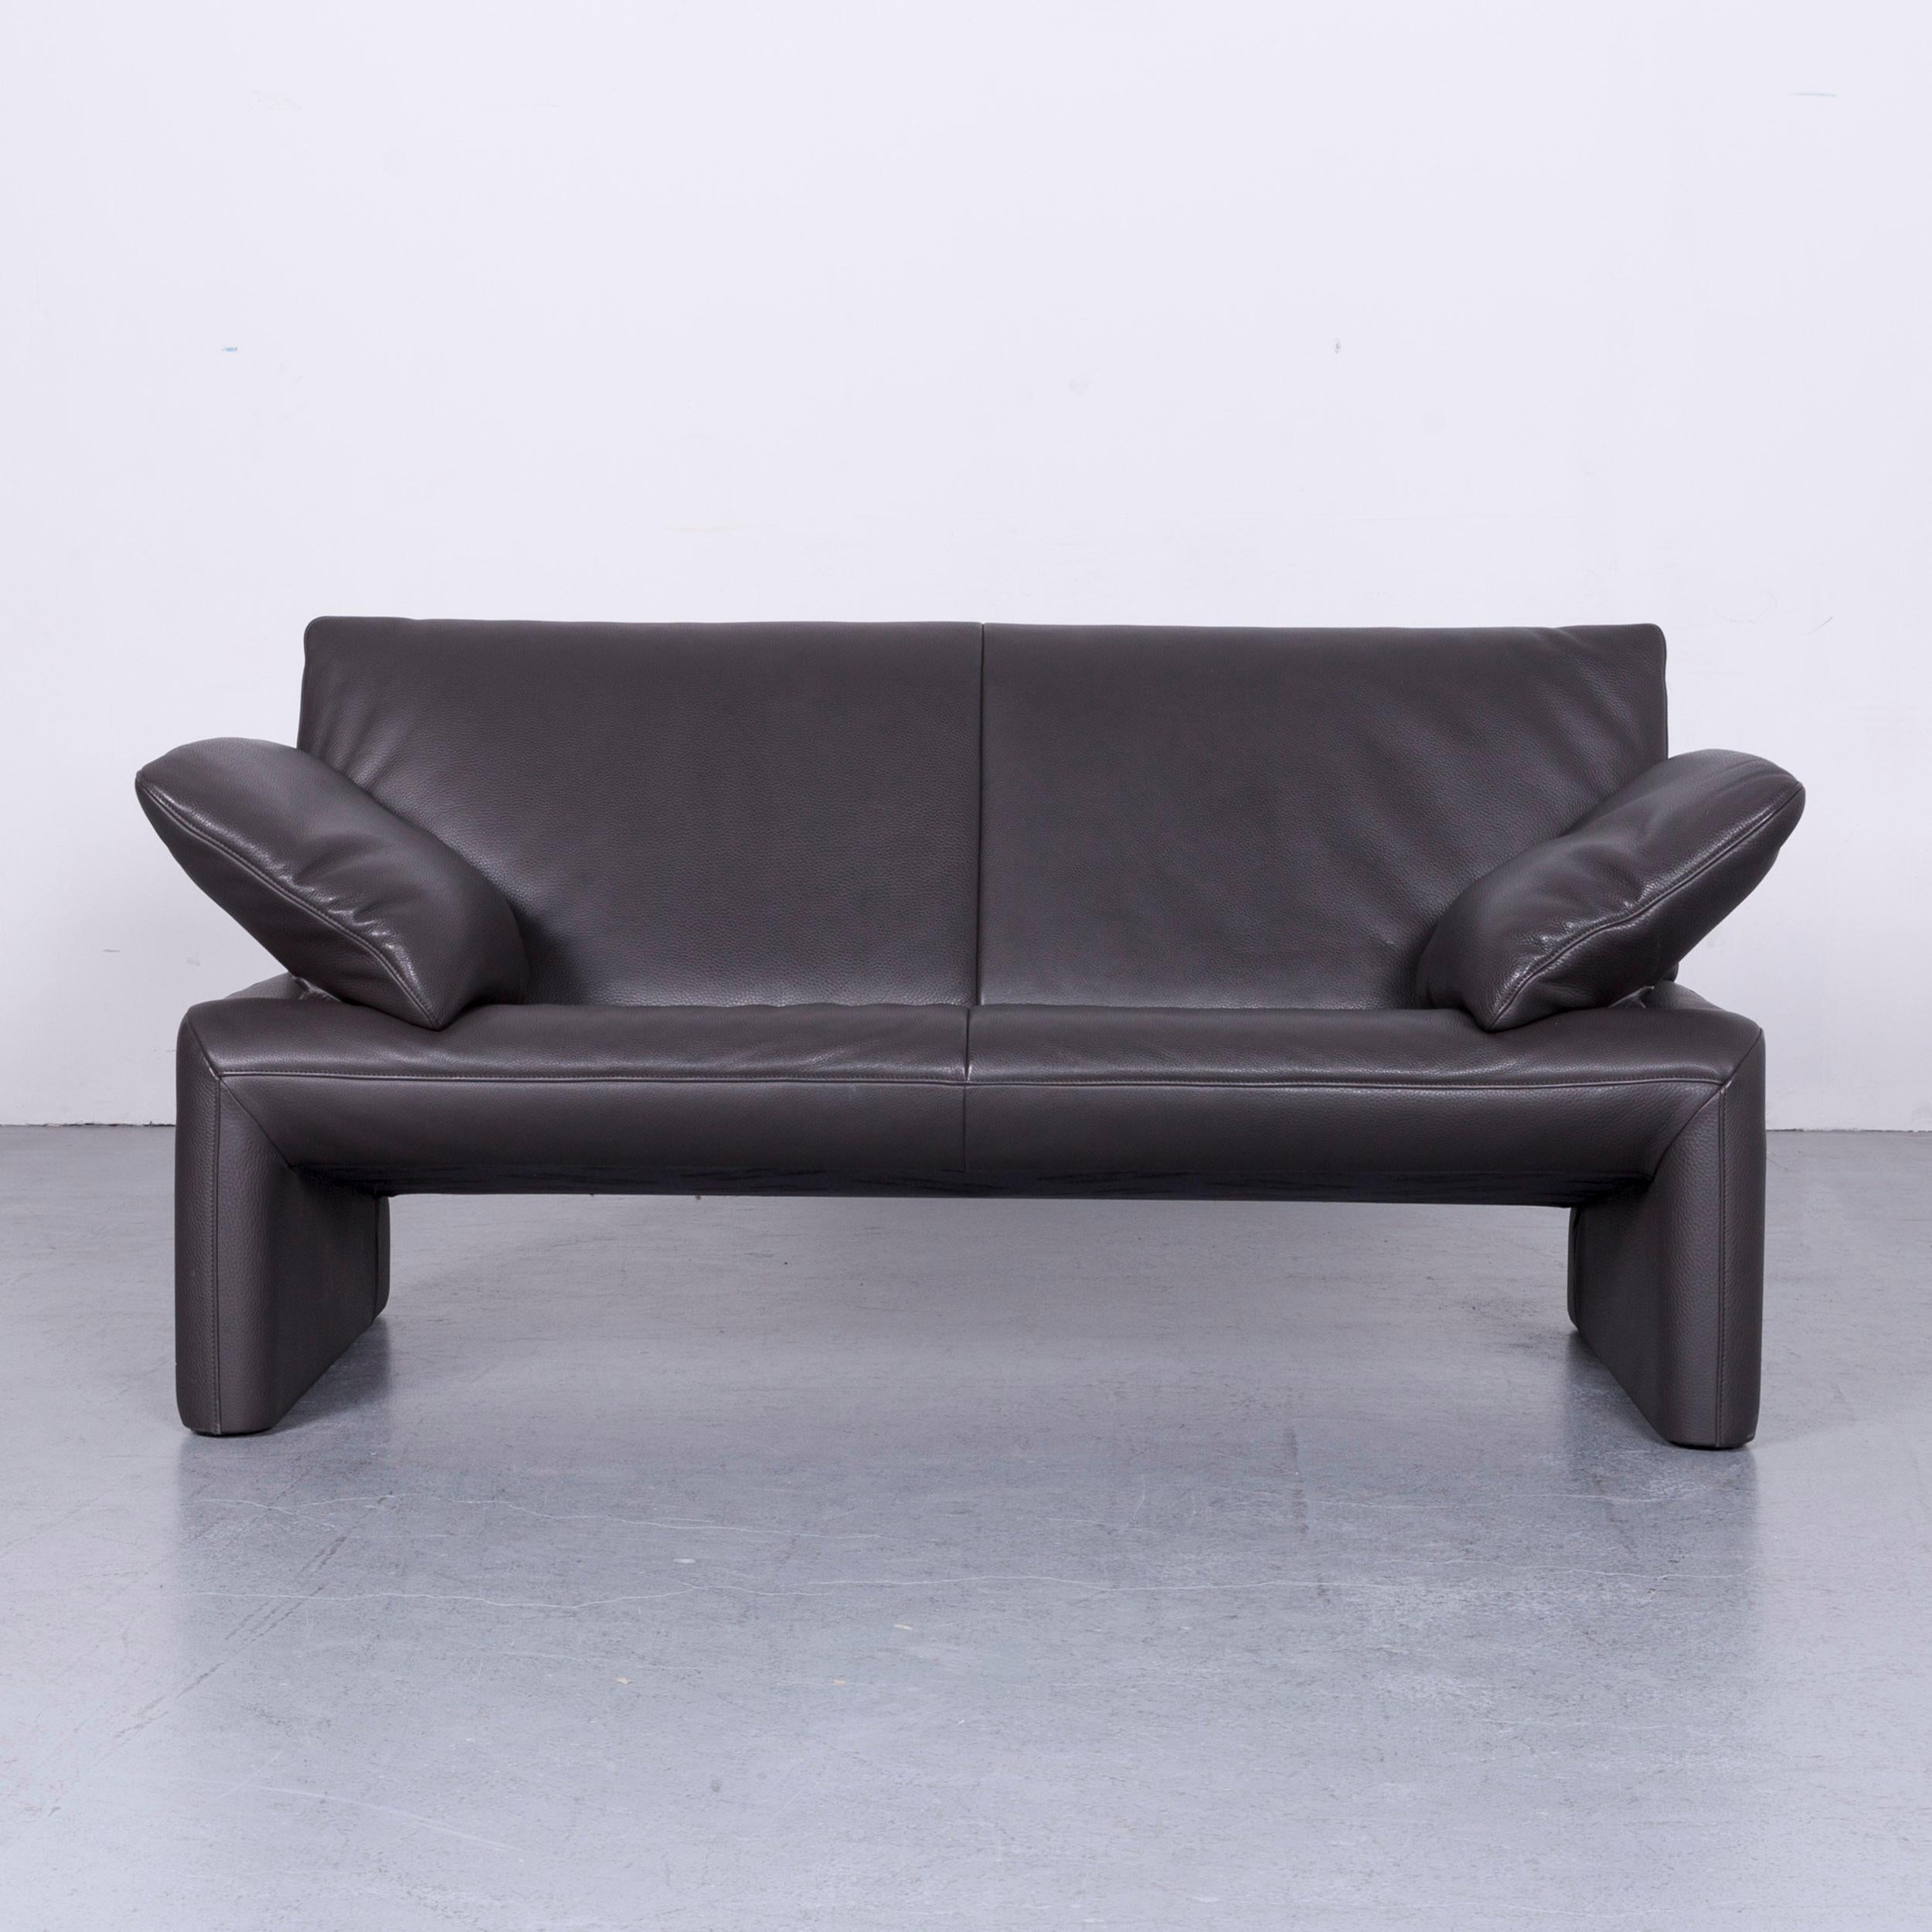 We bring to you an Jori linea designer leather sofa grey two-seat couch.